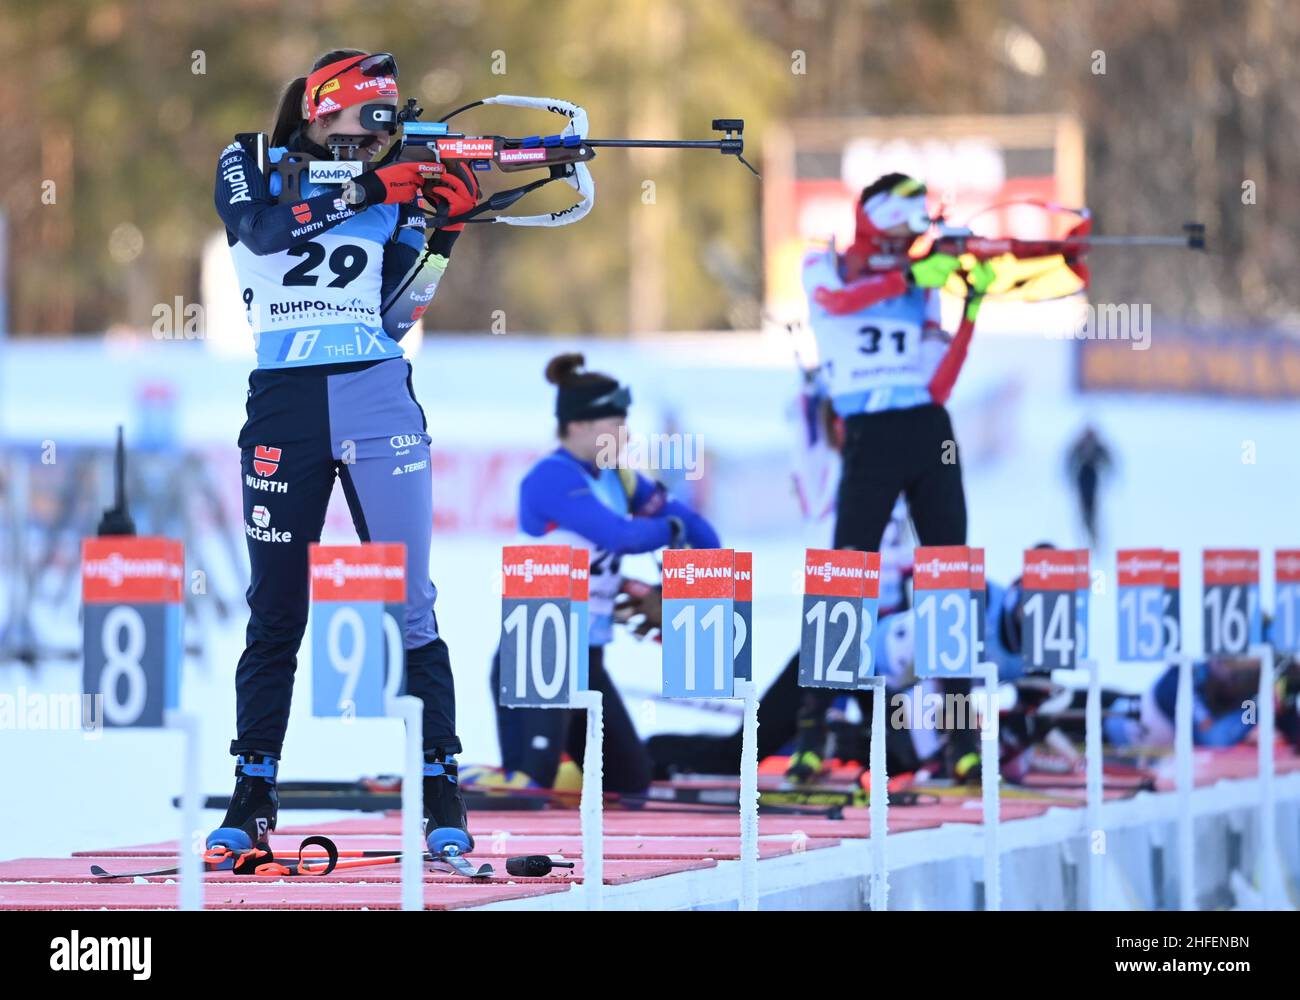 Ruhpolding, Germany. 16th Jan, 2022. Biathlon: World Cup, 1245: Pursuit 10  km, Women 1445: Vanessa Voigt (l) from Germany shooting in.IMPORTANT NOTE:  In accordance with the requirements of the DFL Deutsche Fußball